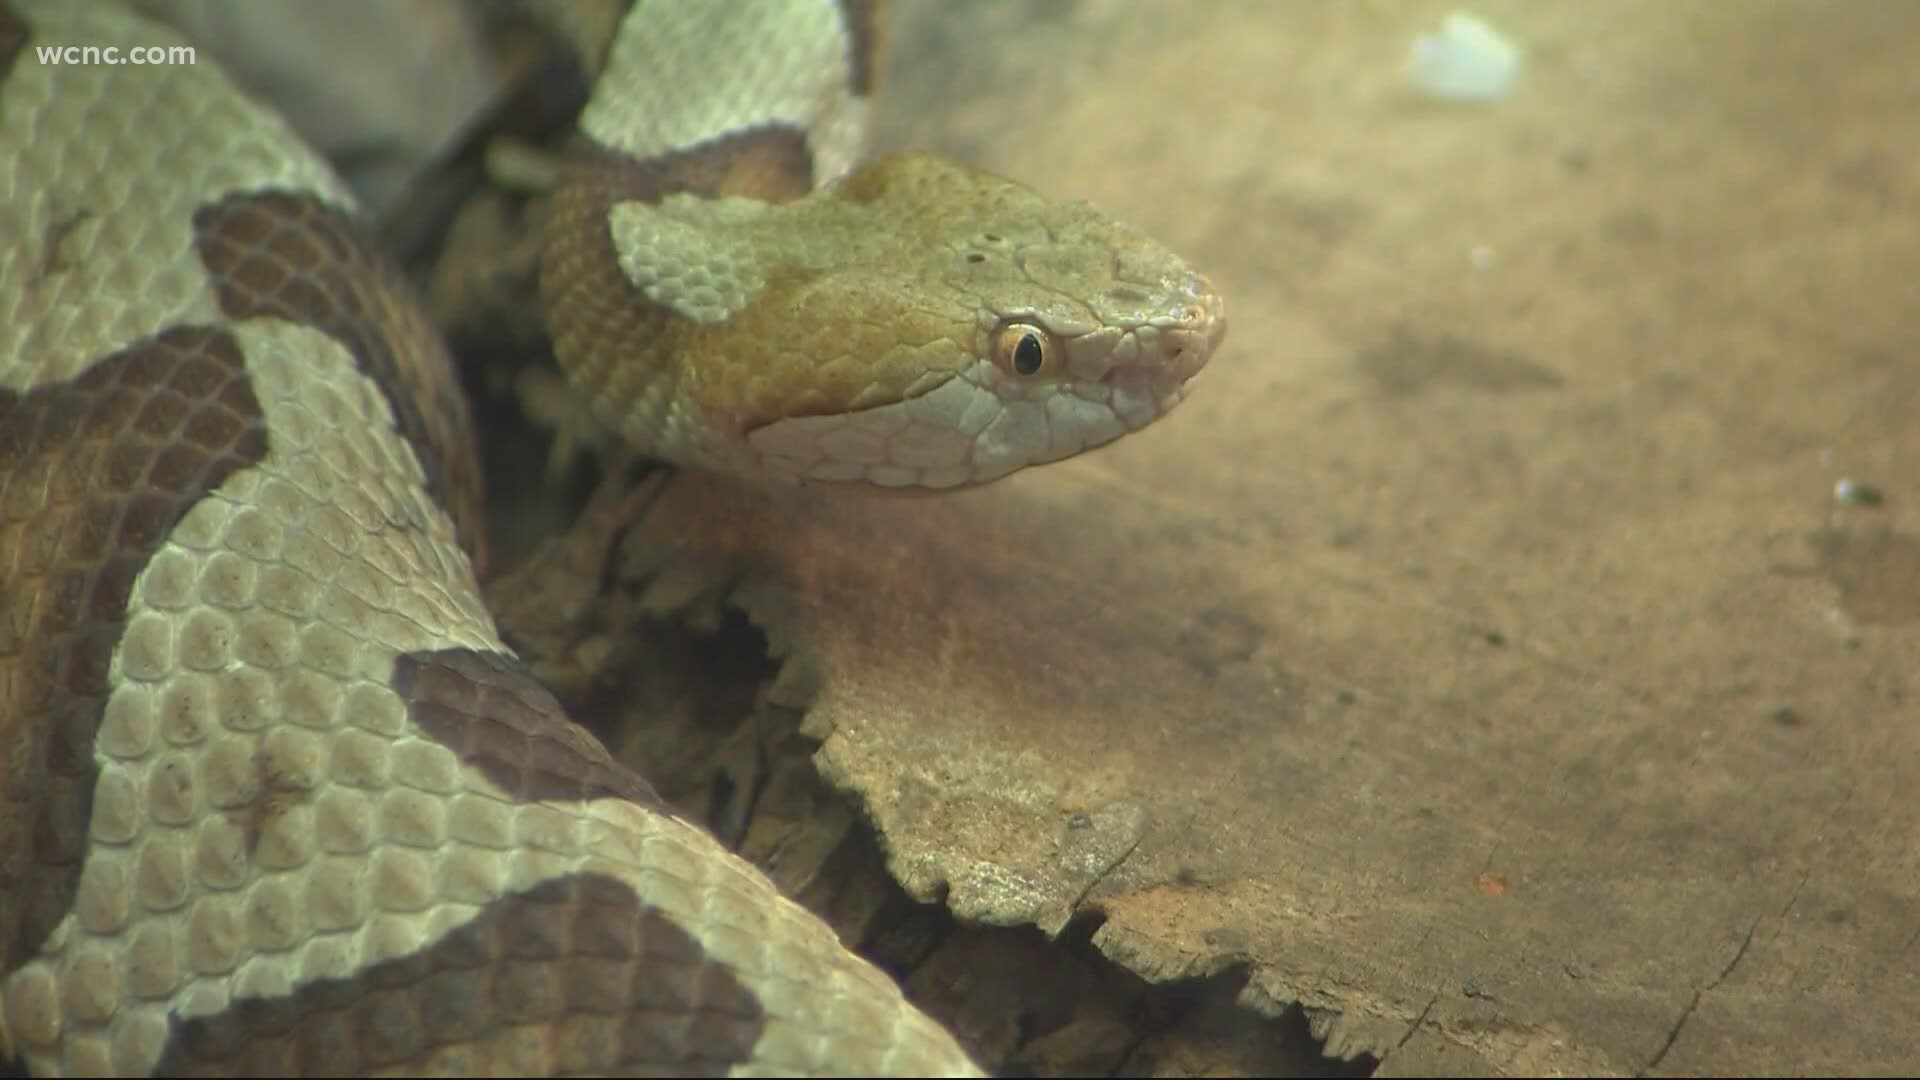 Copperhead season has begun and experts give information on where you might find them lurking.